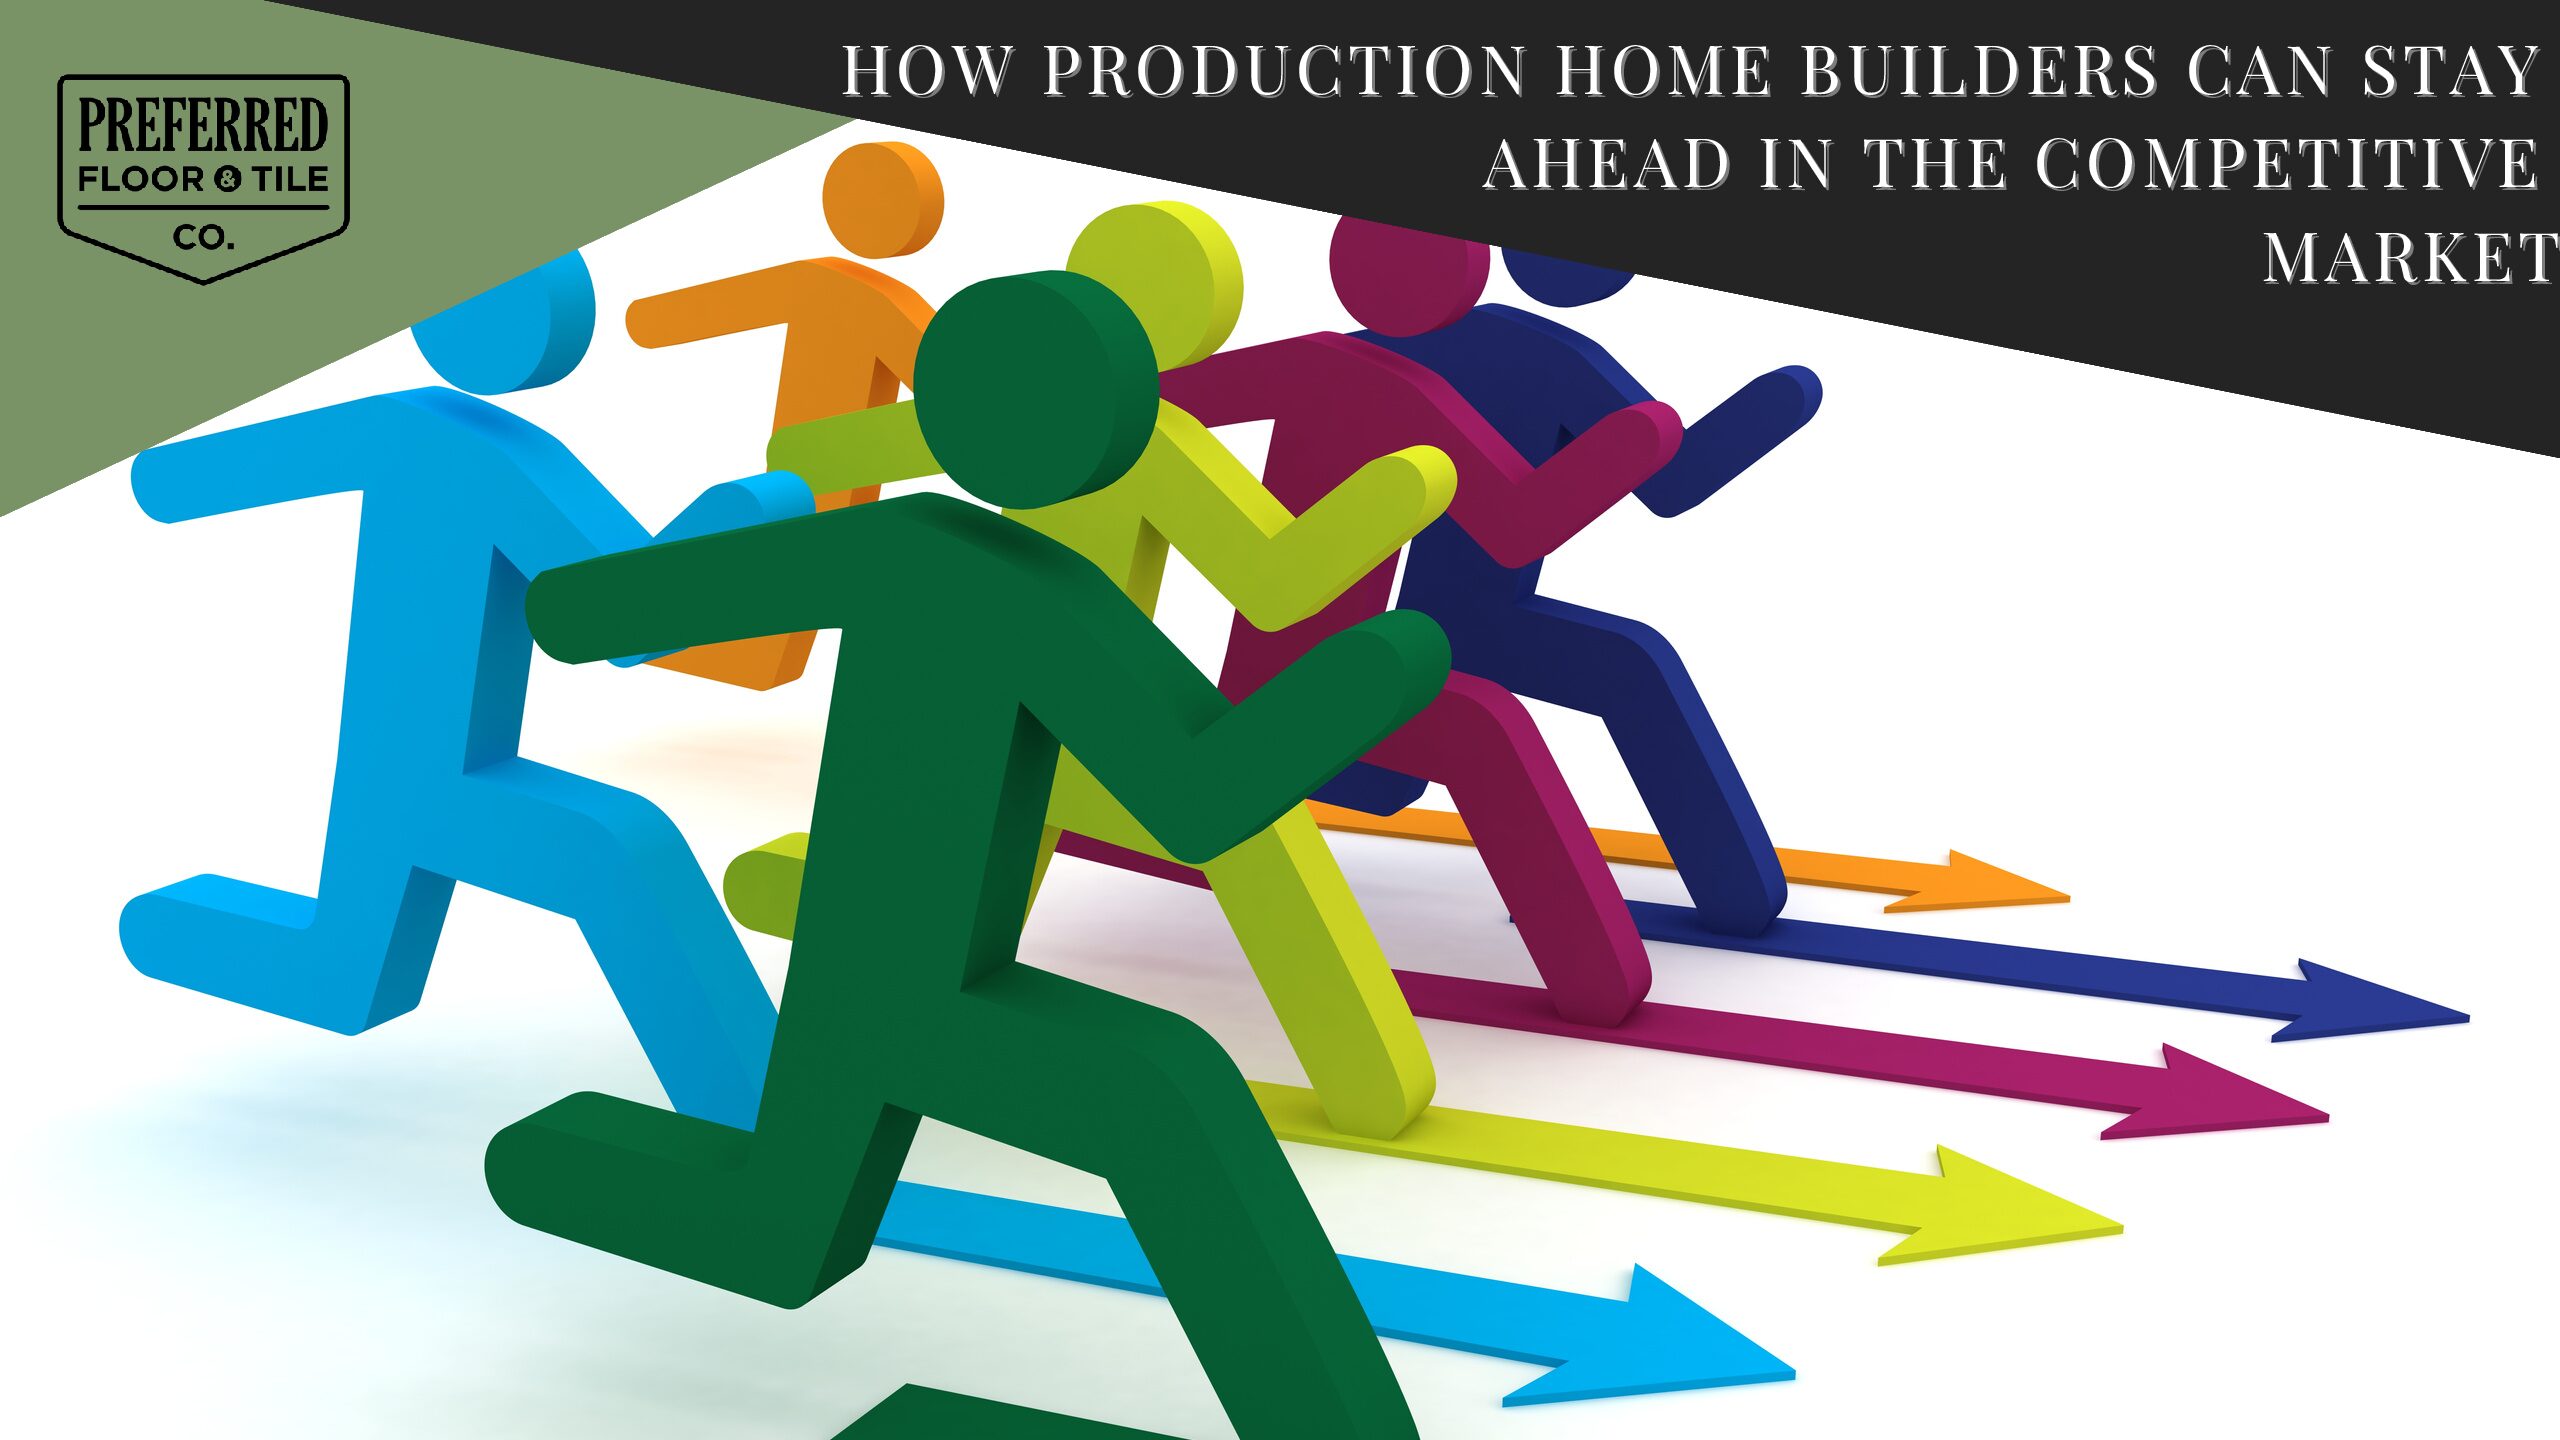 How Production Home Builders Can Stay Ahead in the Competitive Market